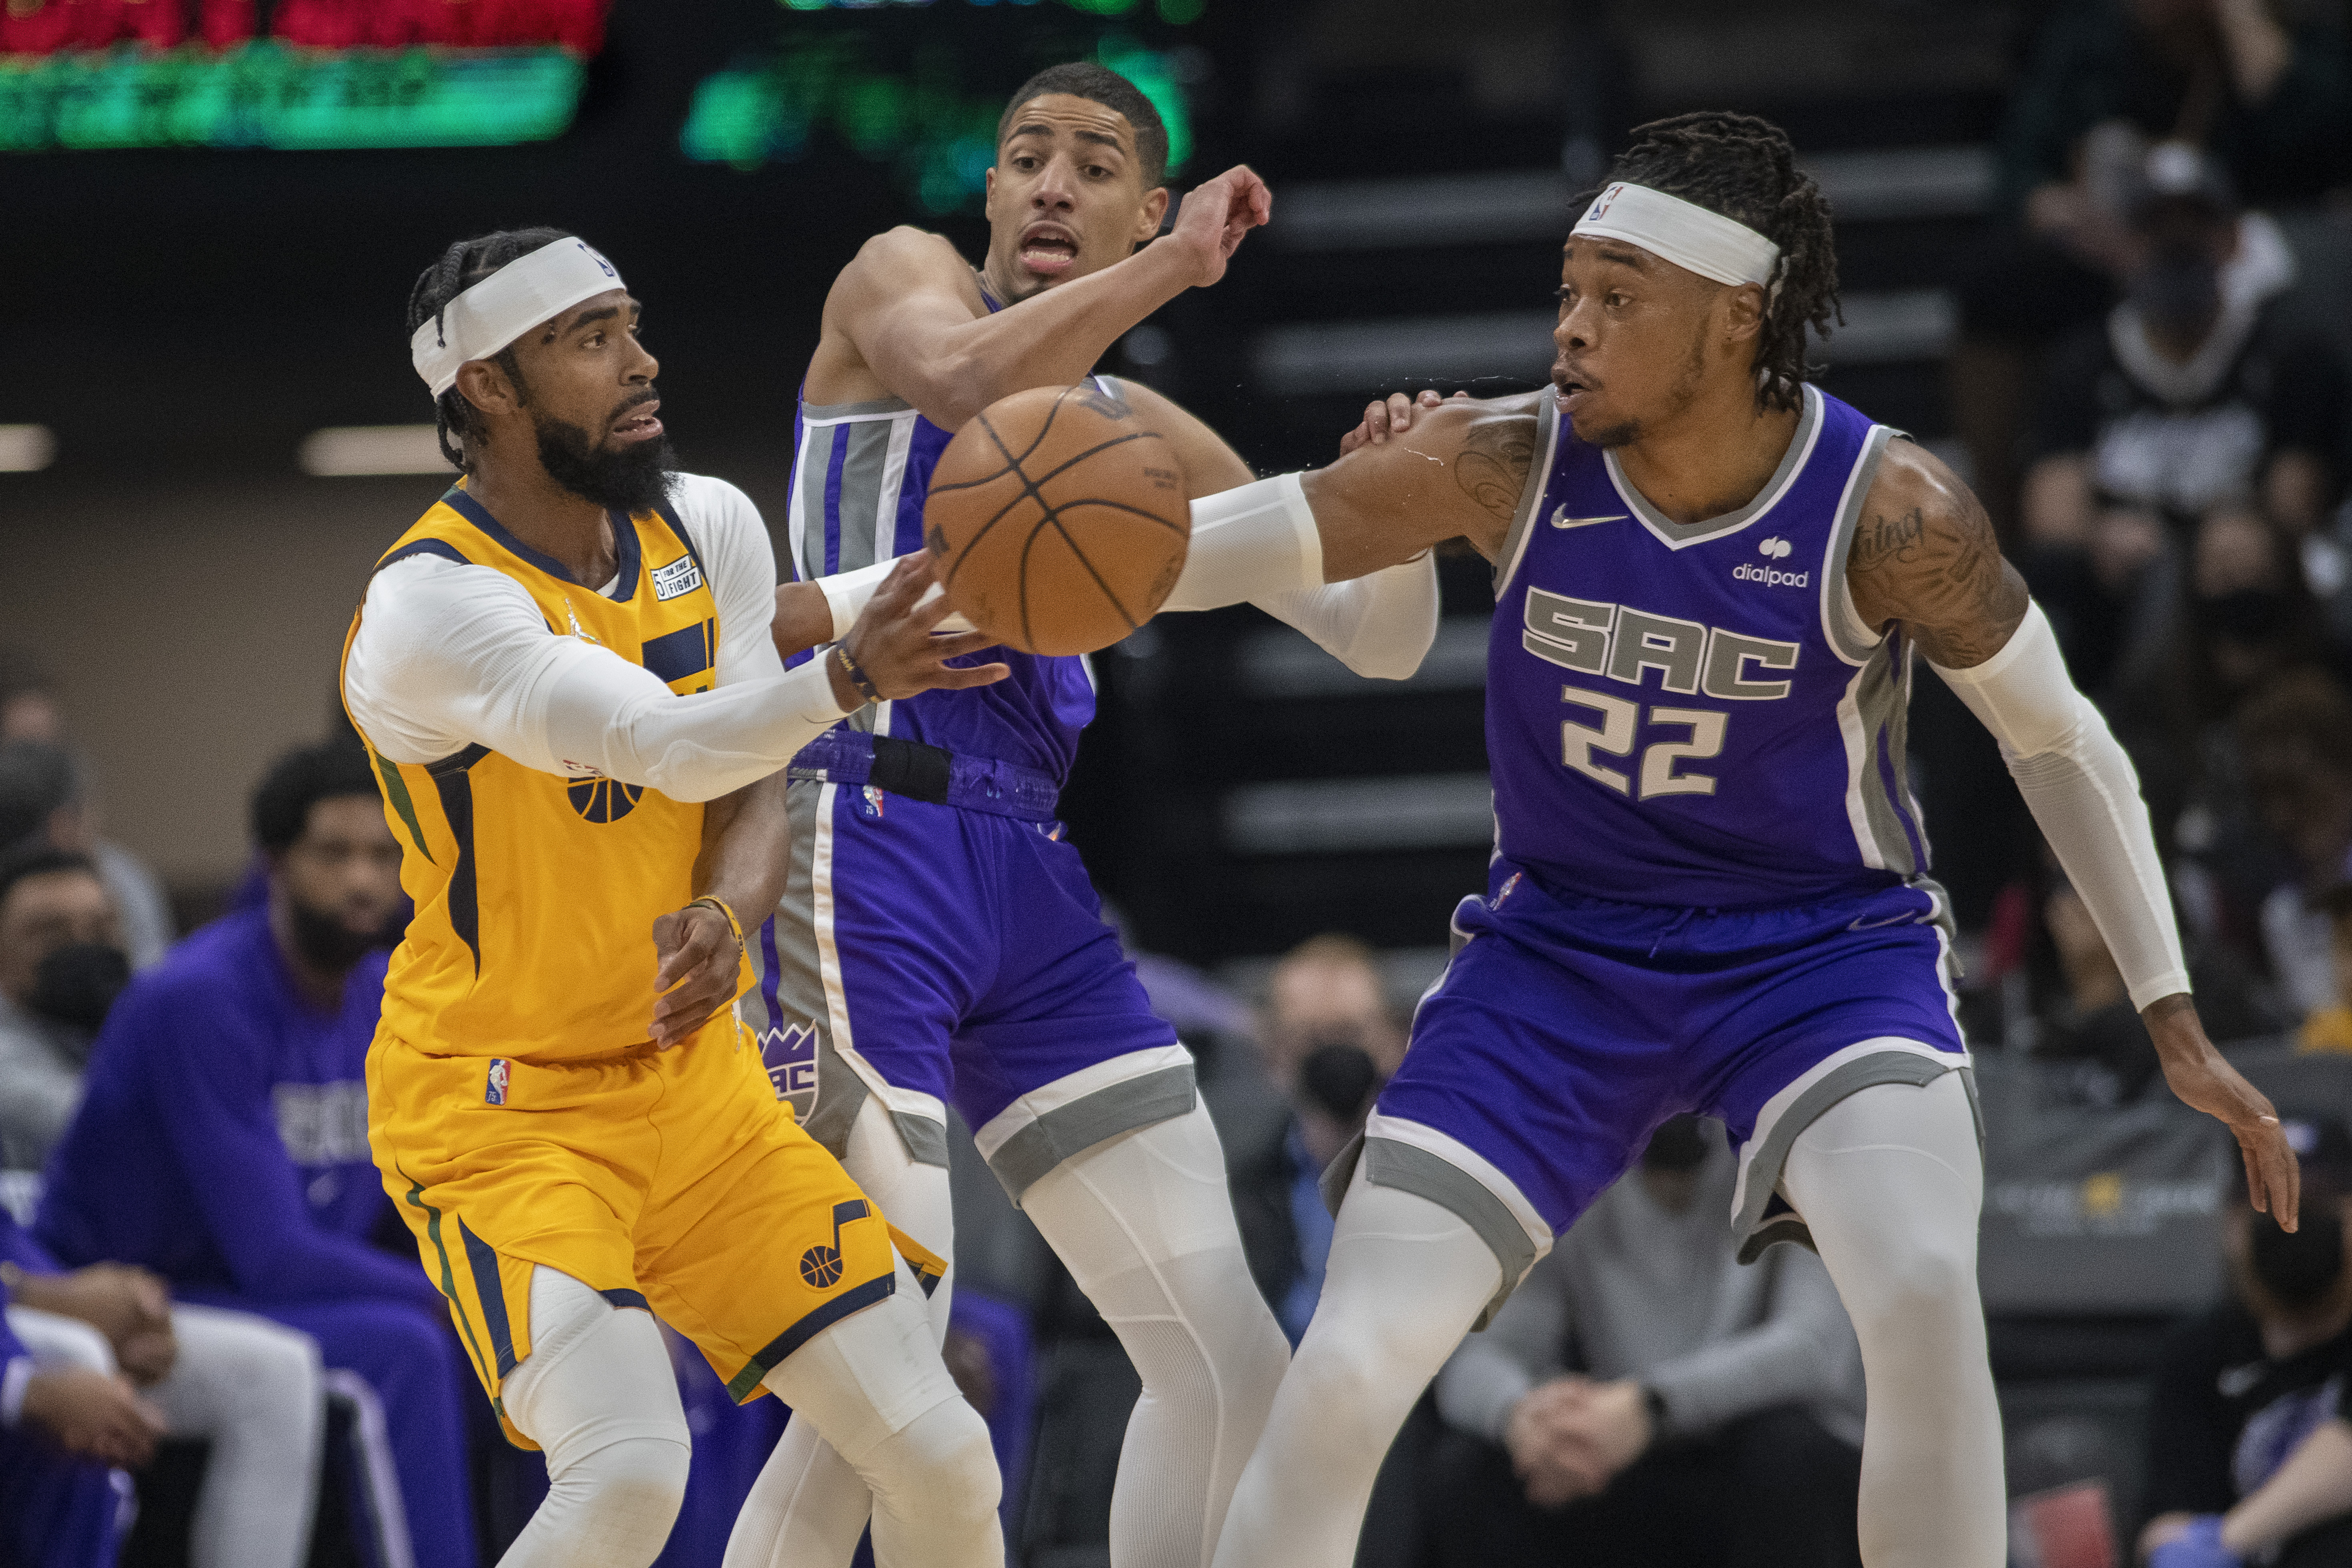 Jazz vs. Kings Game Delayed After Fan Vomits on Court in 4th Quarter